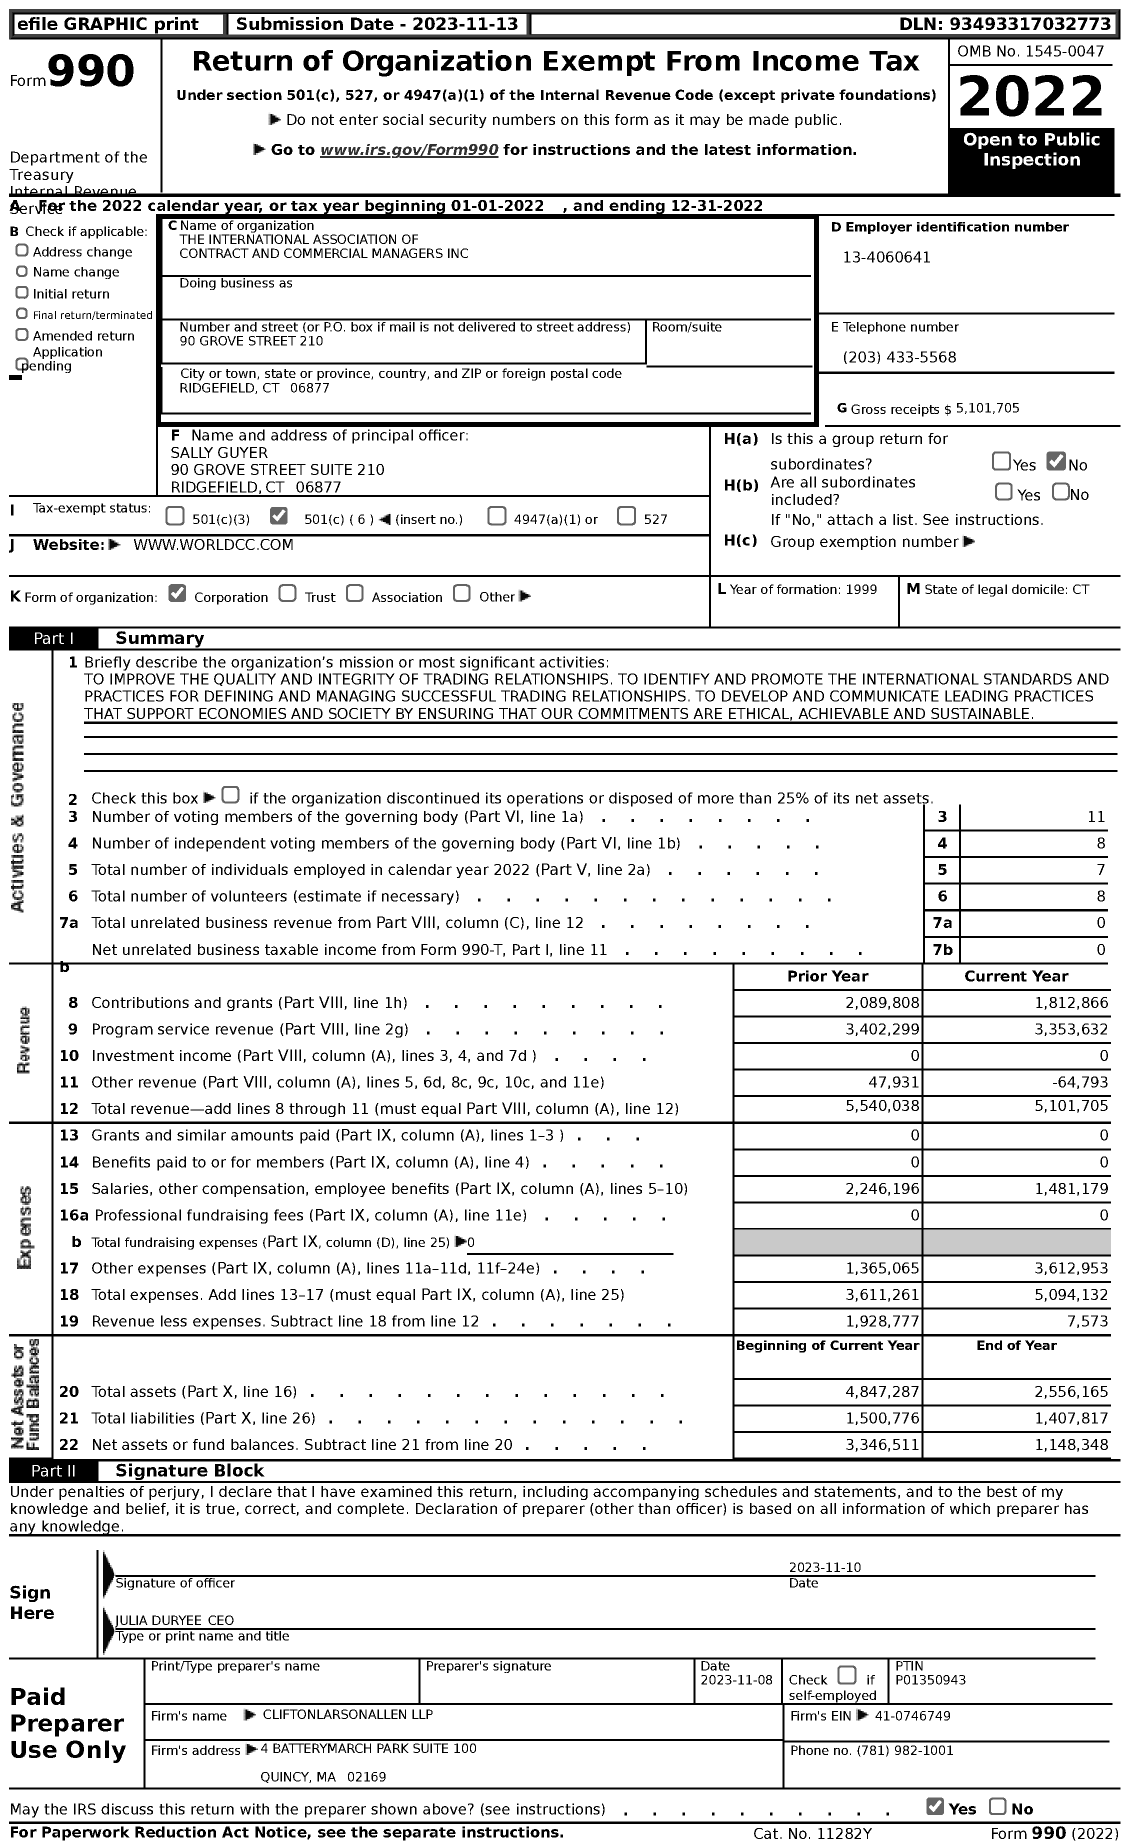 Image of first page of 2022 Form 990 for The International Association of Contract and Commercial Managers (IACCM)